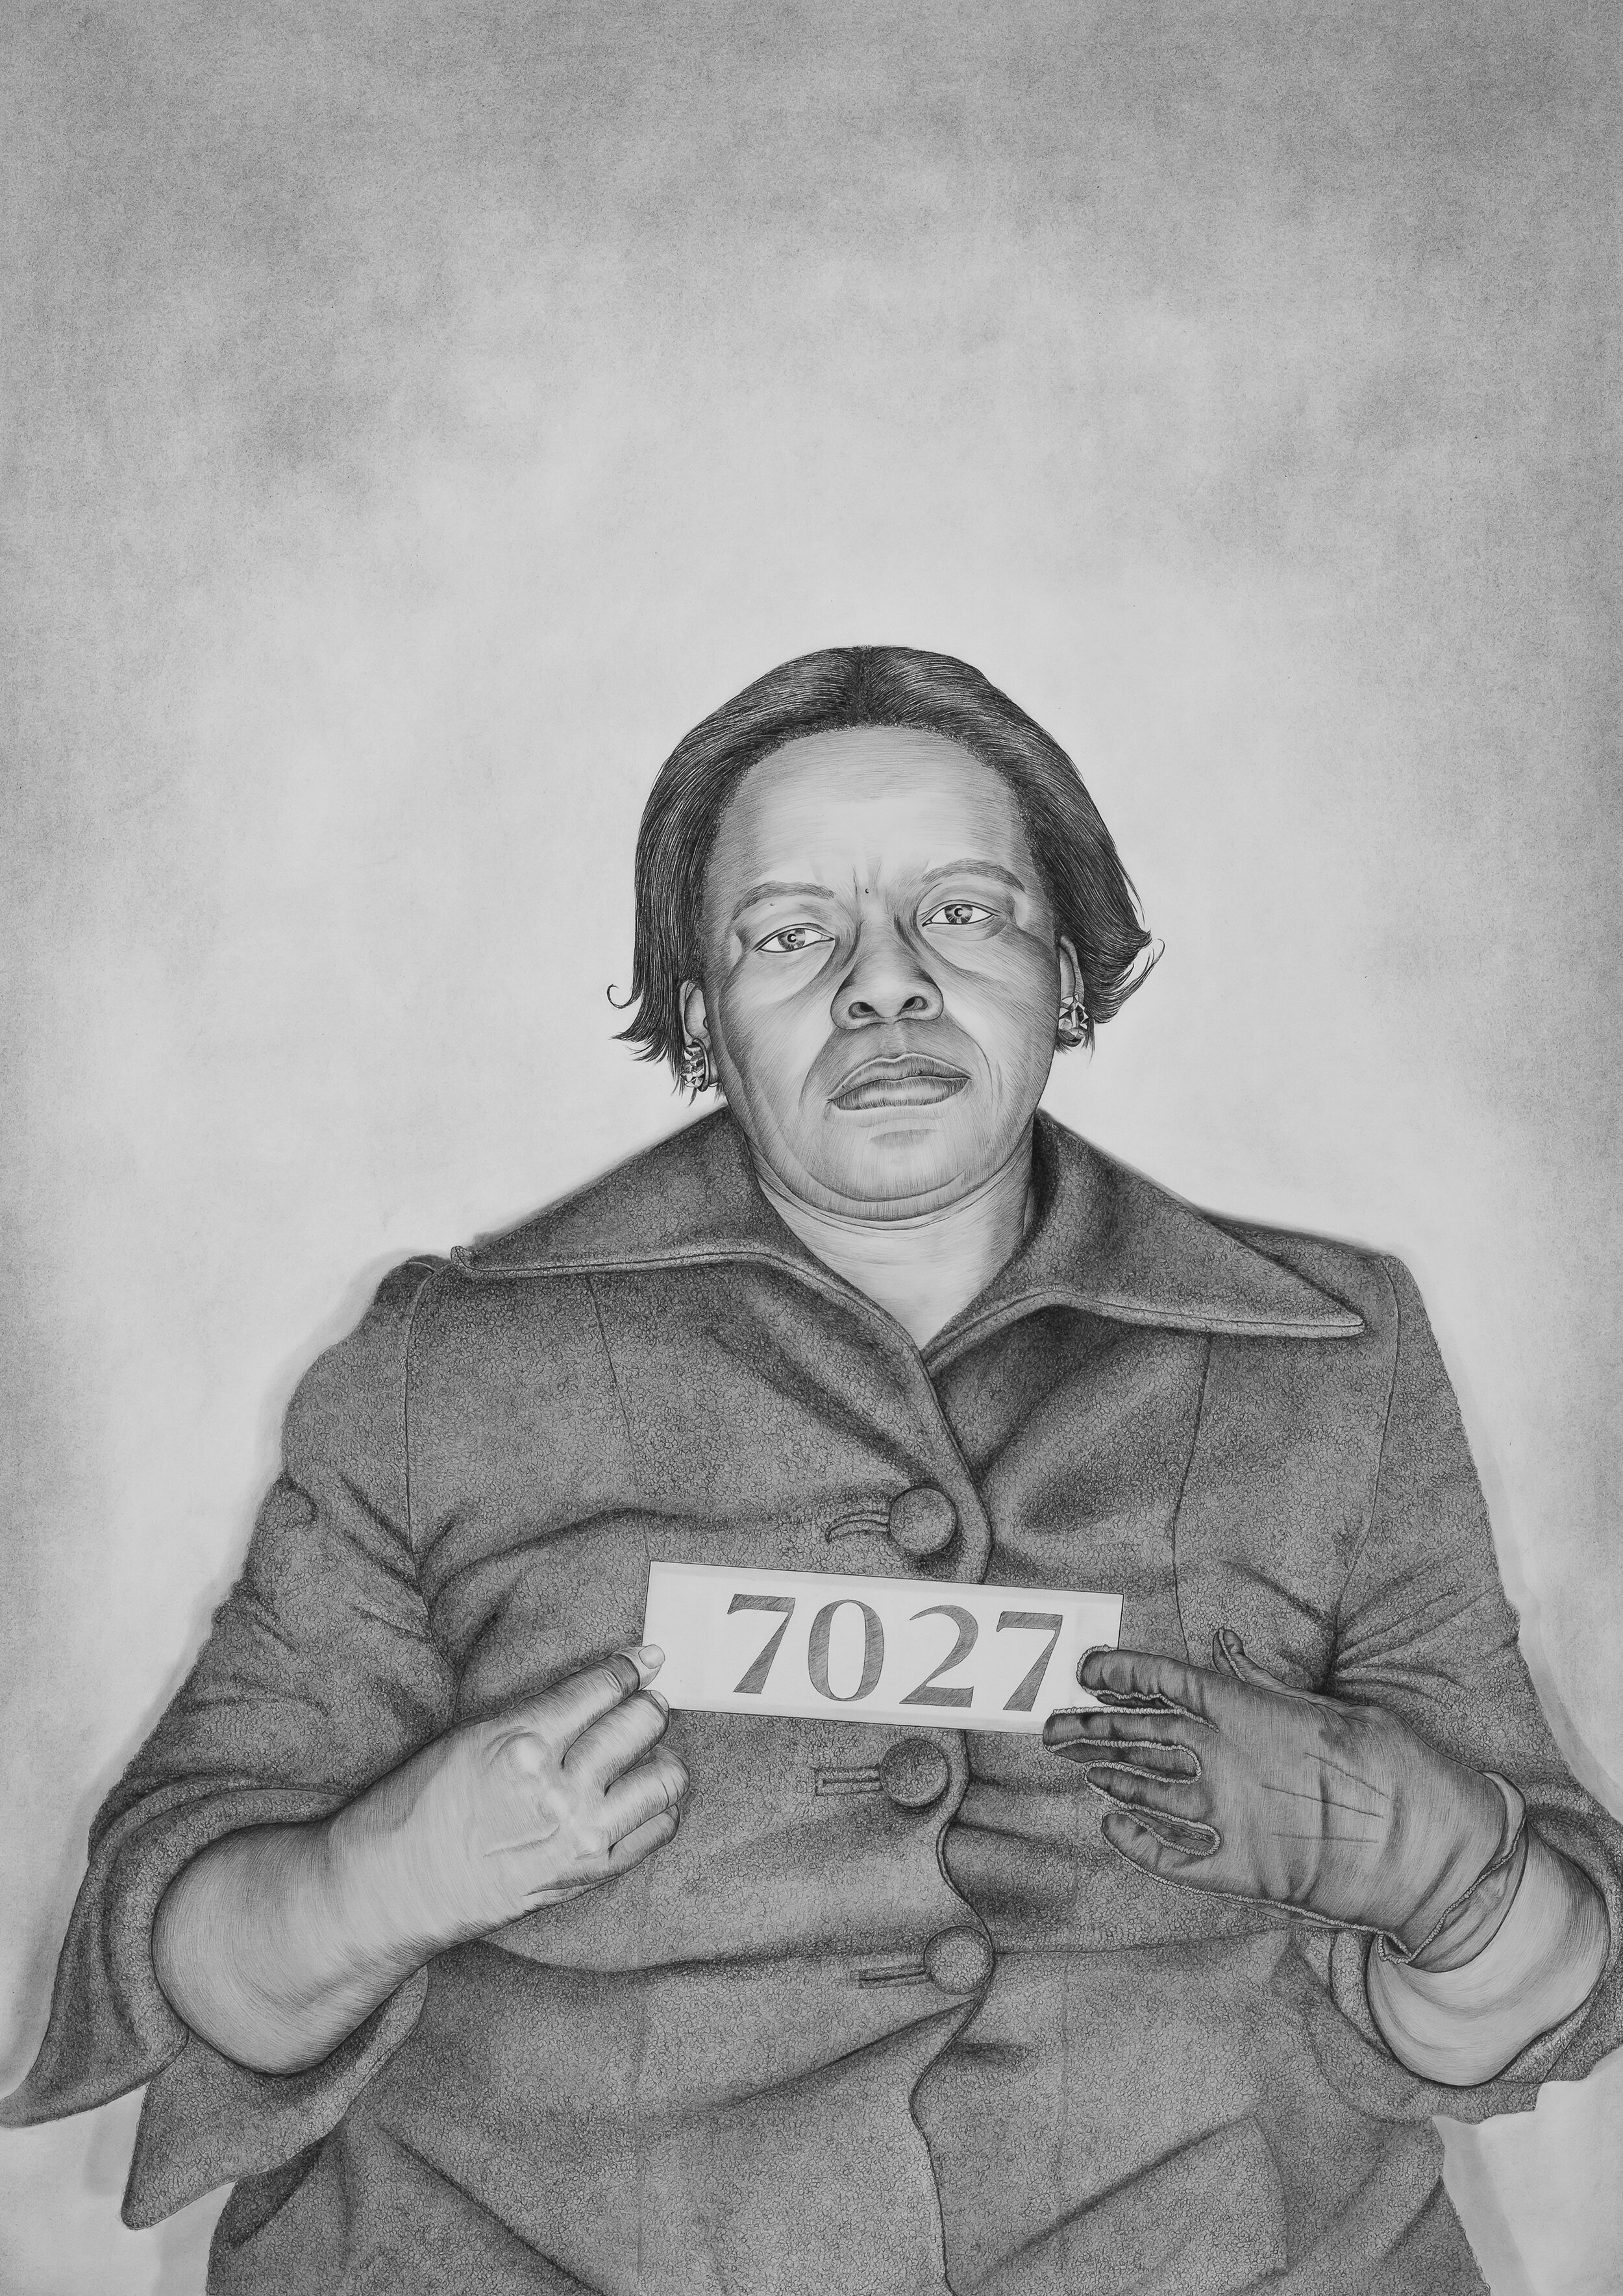  Lava Thomas.  Mugshot Portraits: Women of the Montgomery Bus Boycott, Alberta J. James , 2018. Graphite and Conté pencil on paper, 47 x 33 ¼ inches. Collection of Doree Friedman. Image courtesy of the artist and Rena Bransten Gallery. Photo: Philli